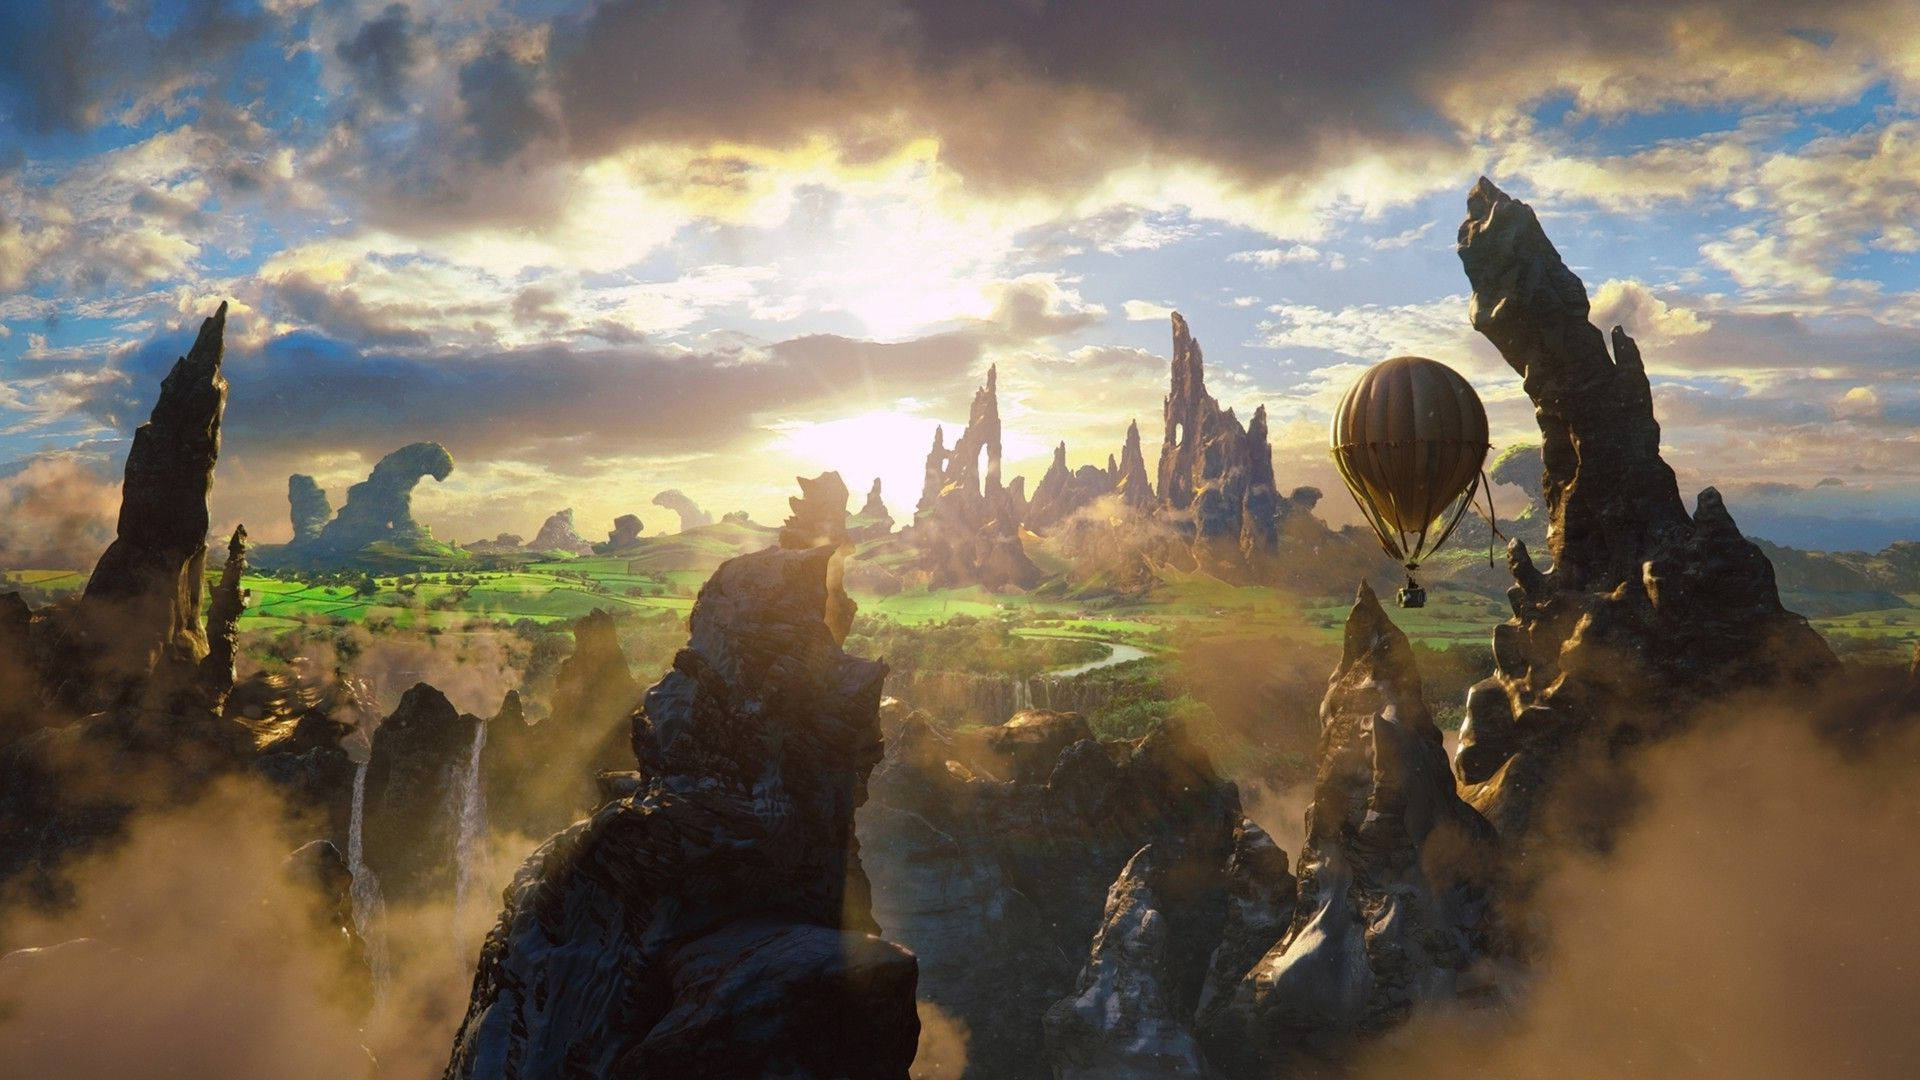 Oz The Great And Powerful Fantasy Landscape Background